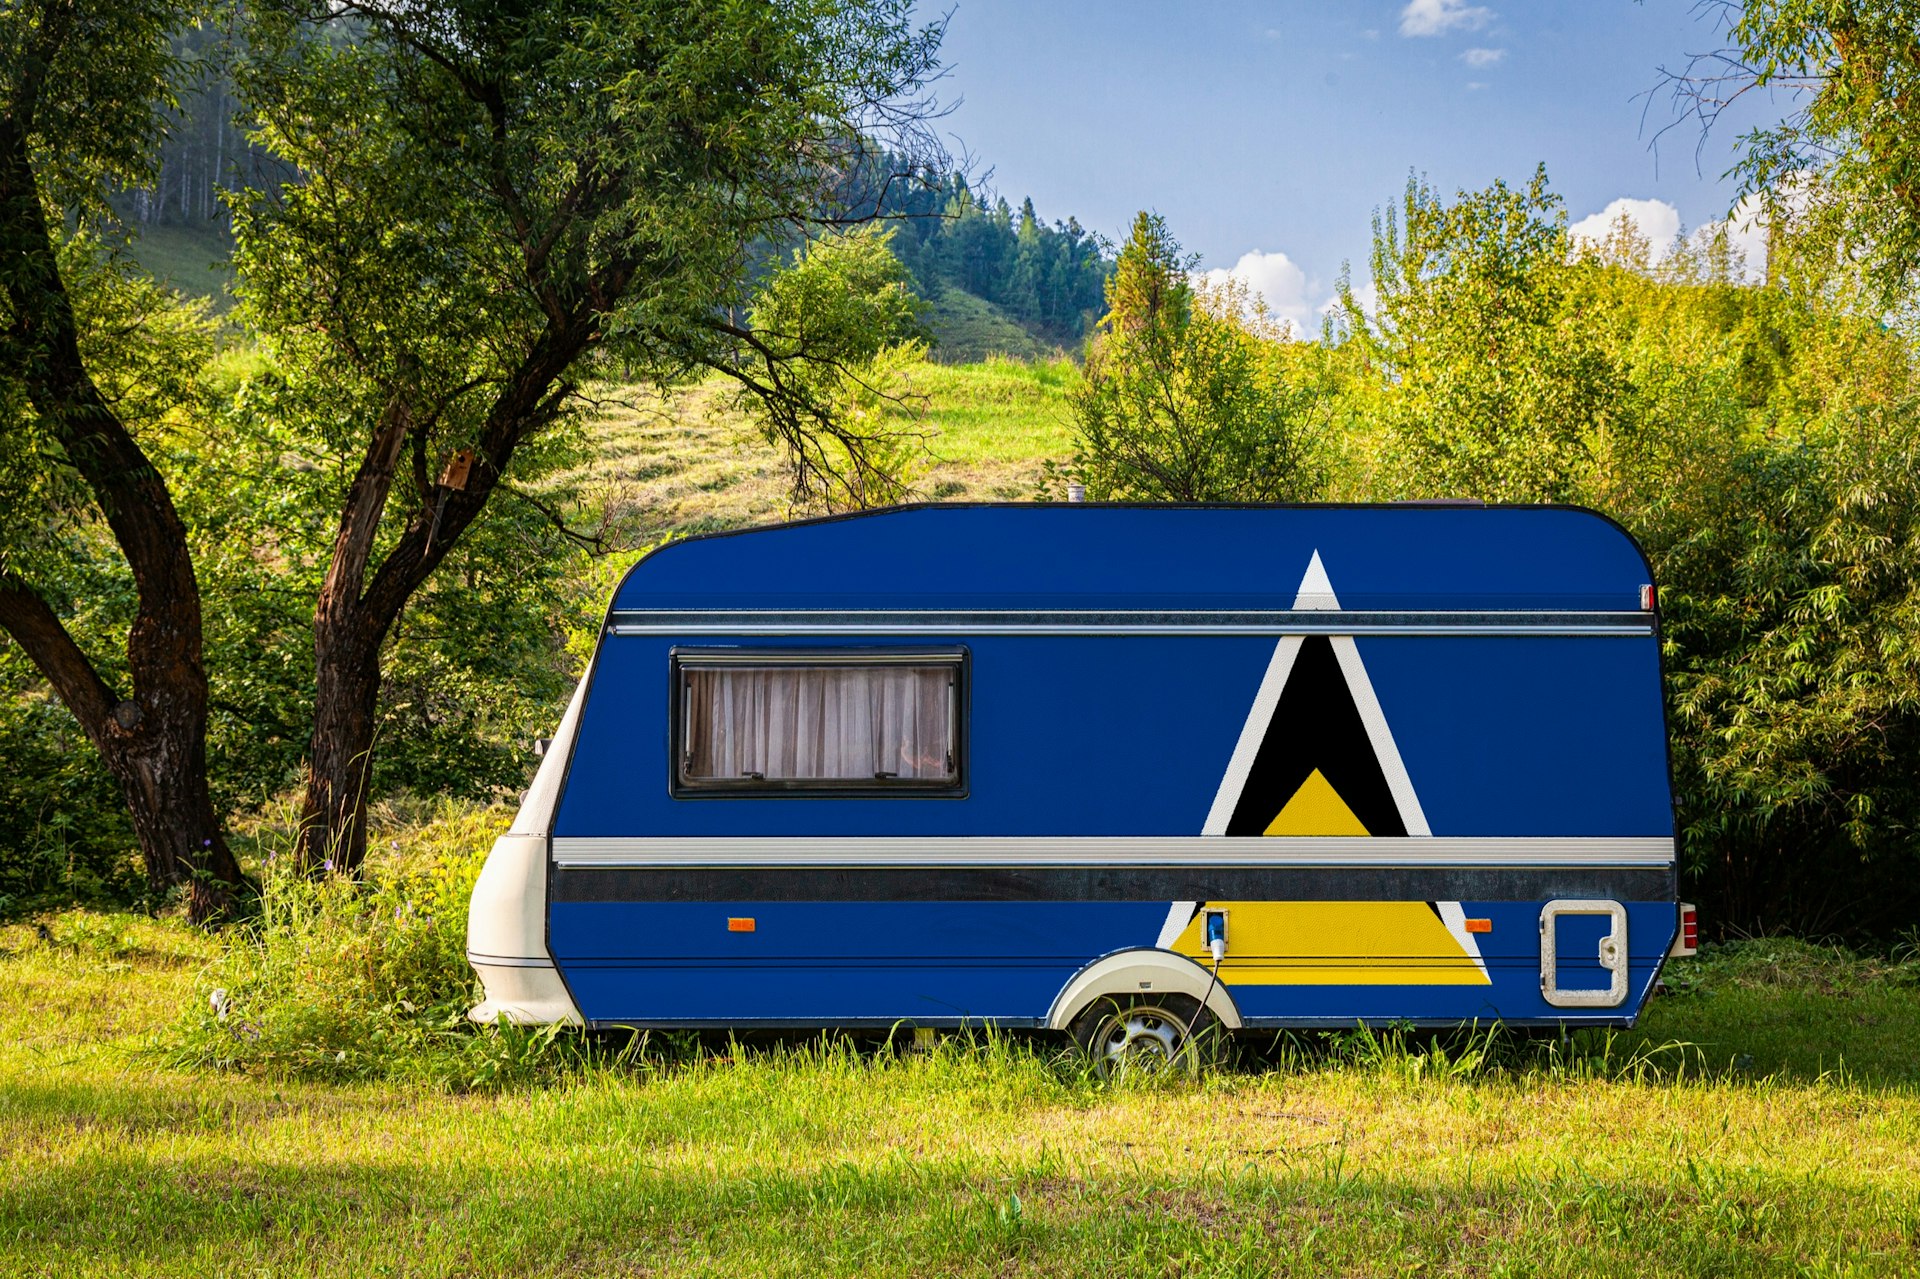 A car trailer, a motor home, painted in the national flag of  Saint Lucia is parked on grass in a mountainous region